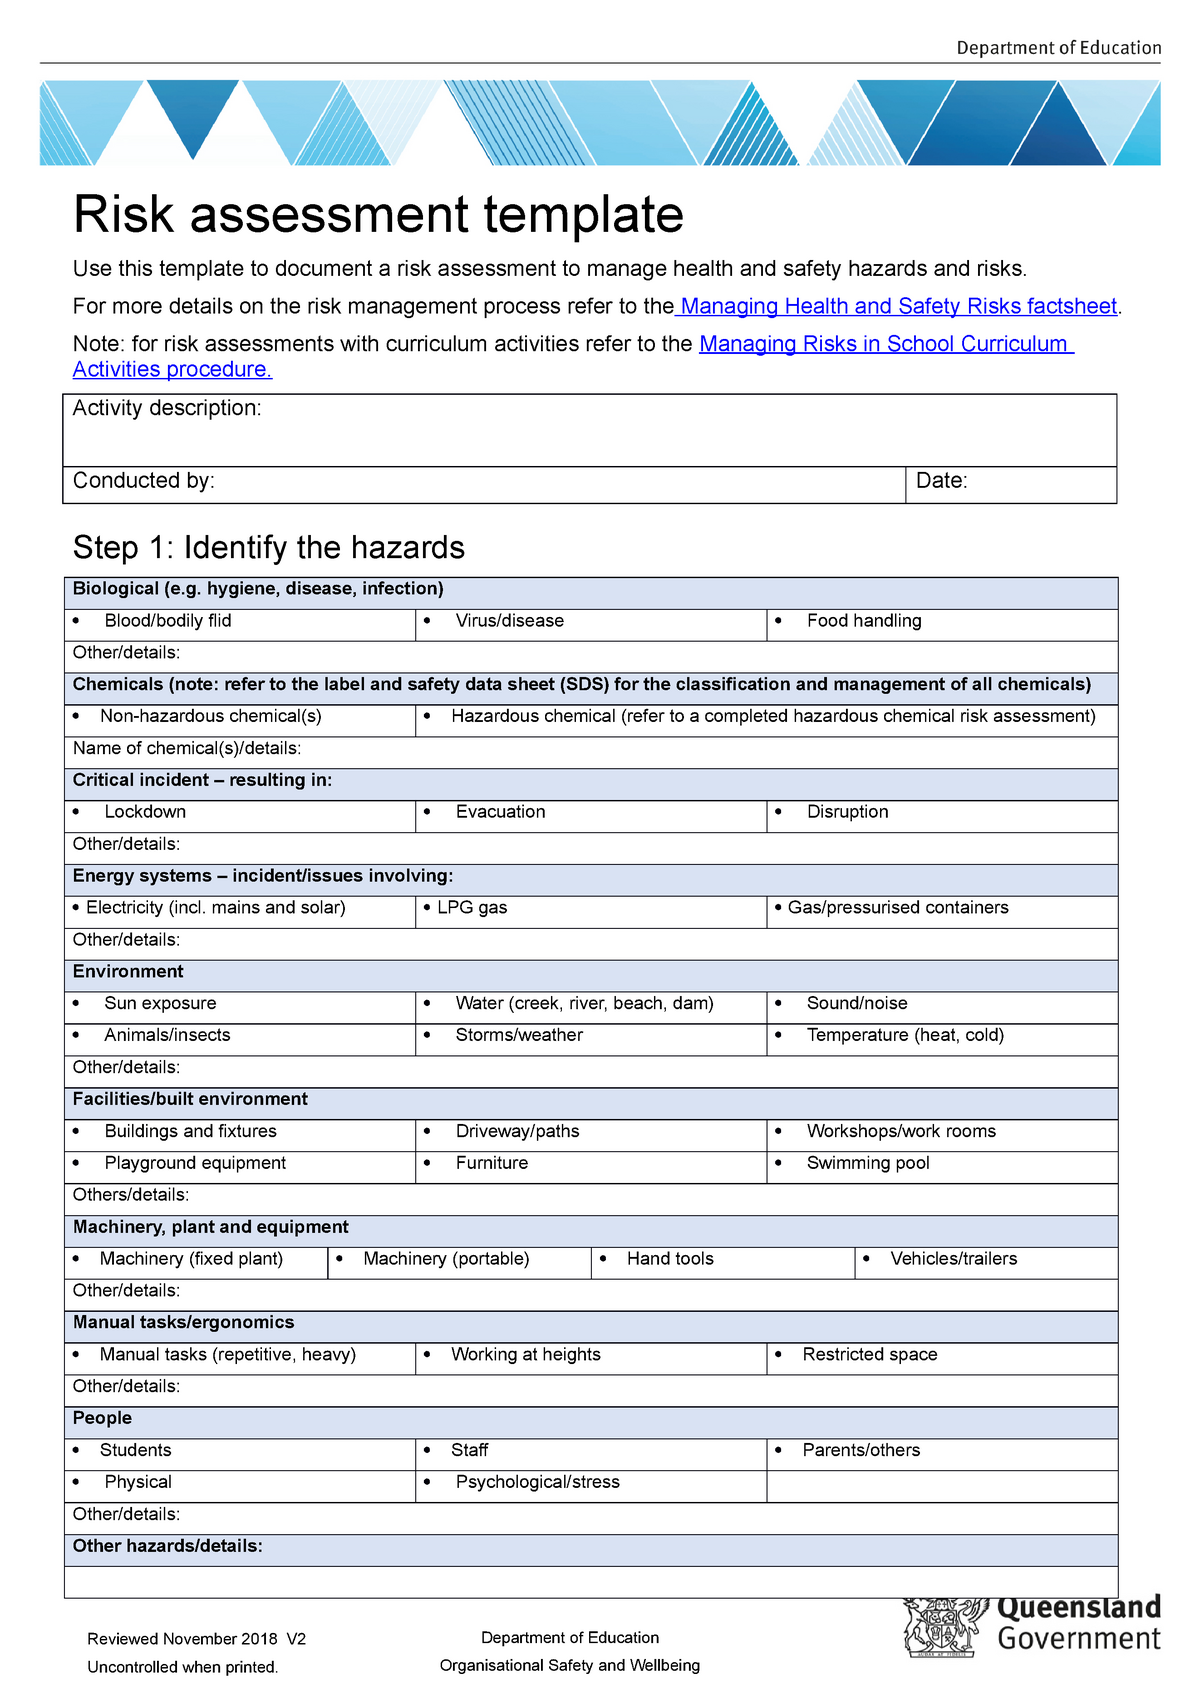 Health Safety Risk Assessment Template Risk Assessment Template Use